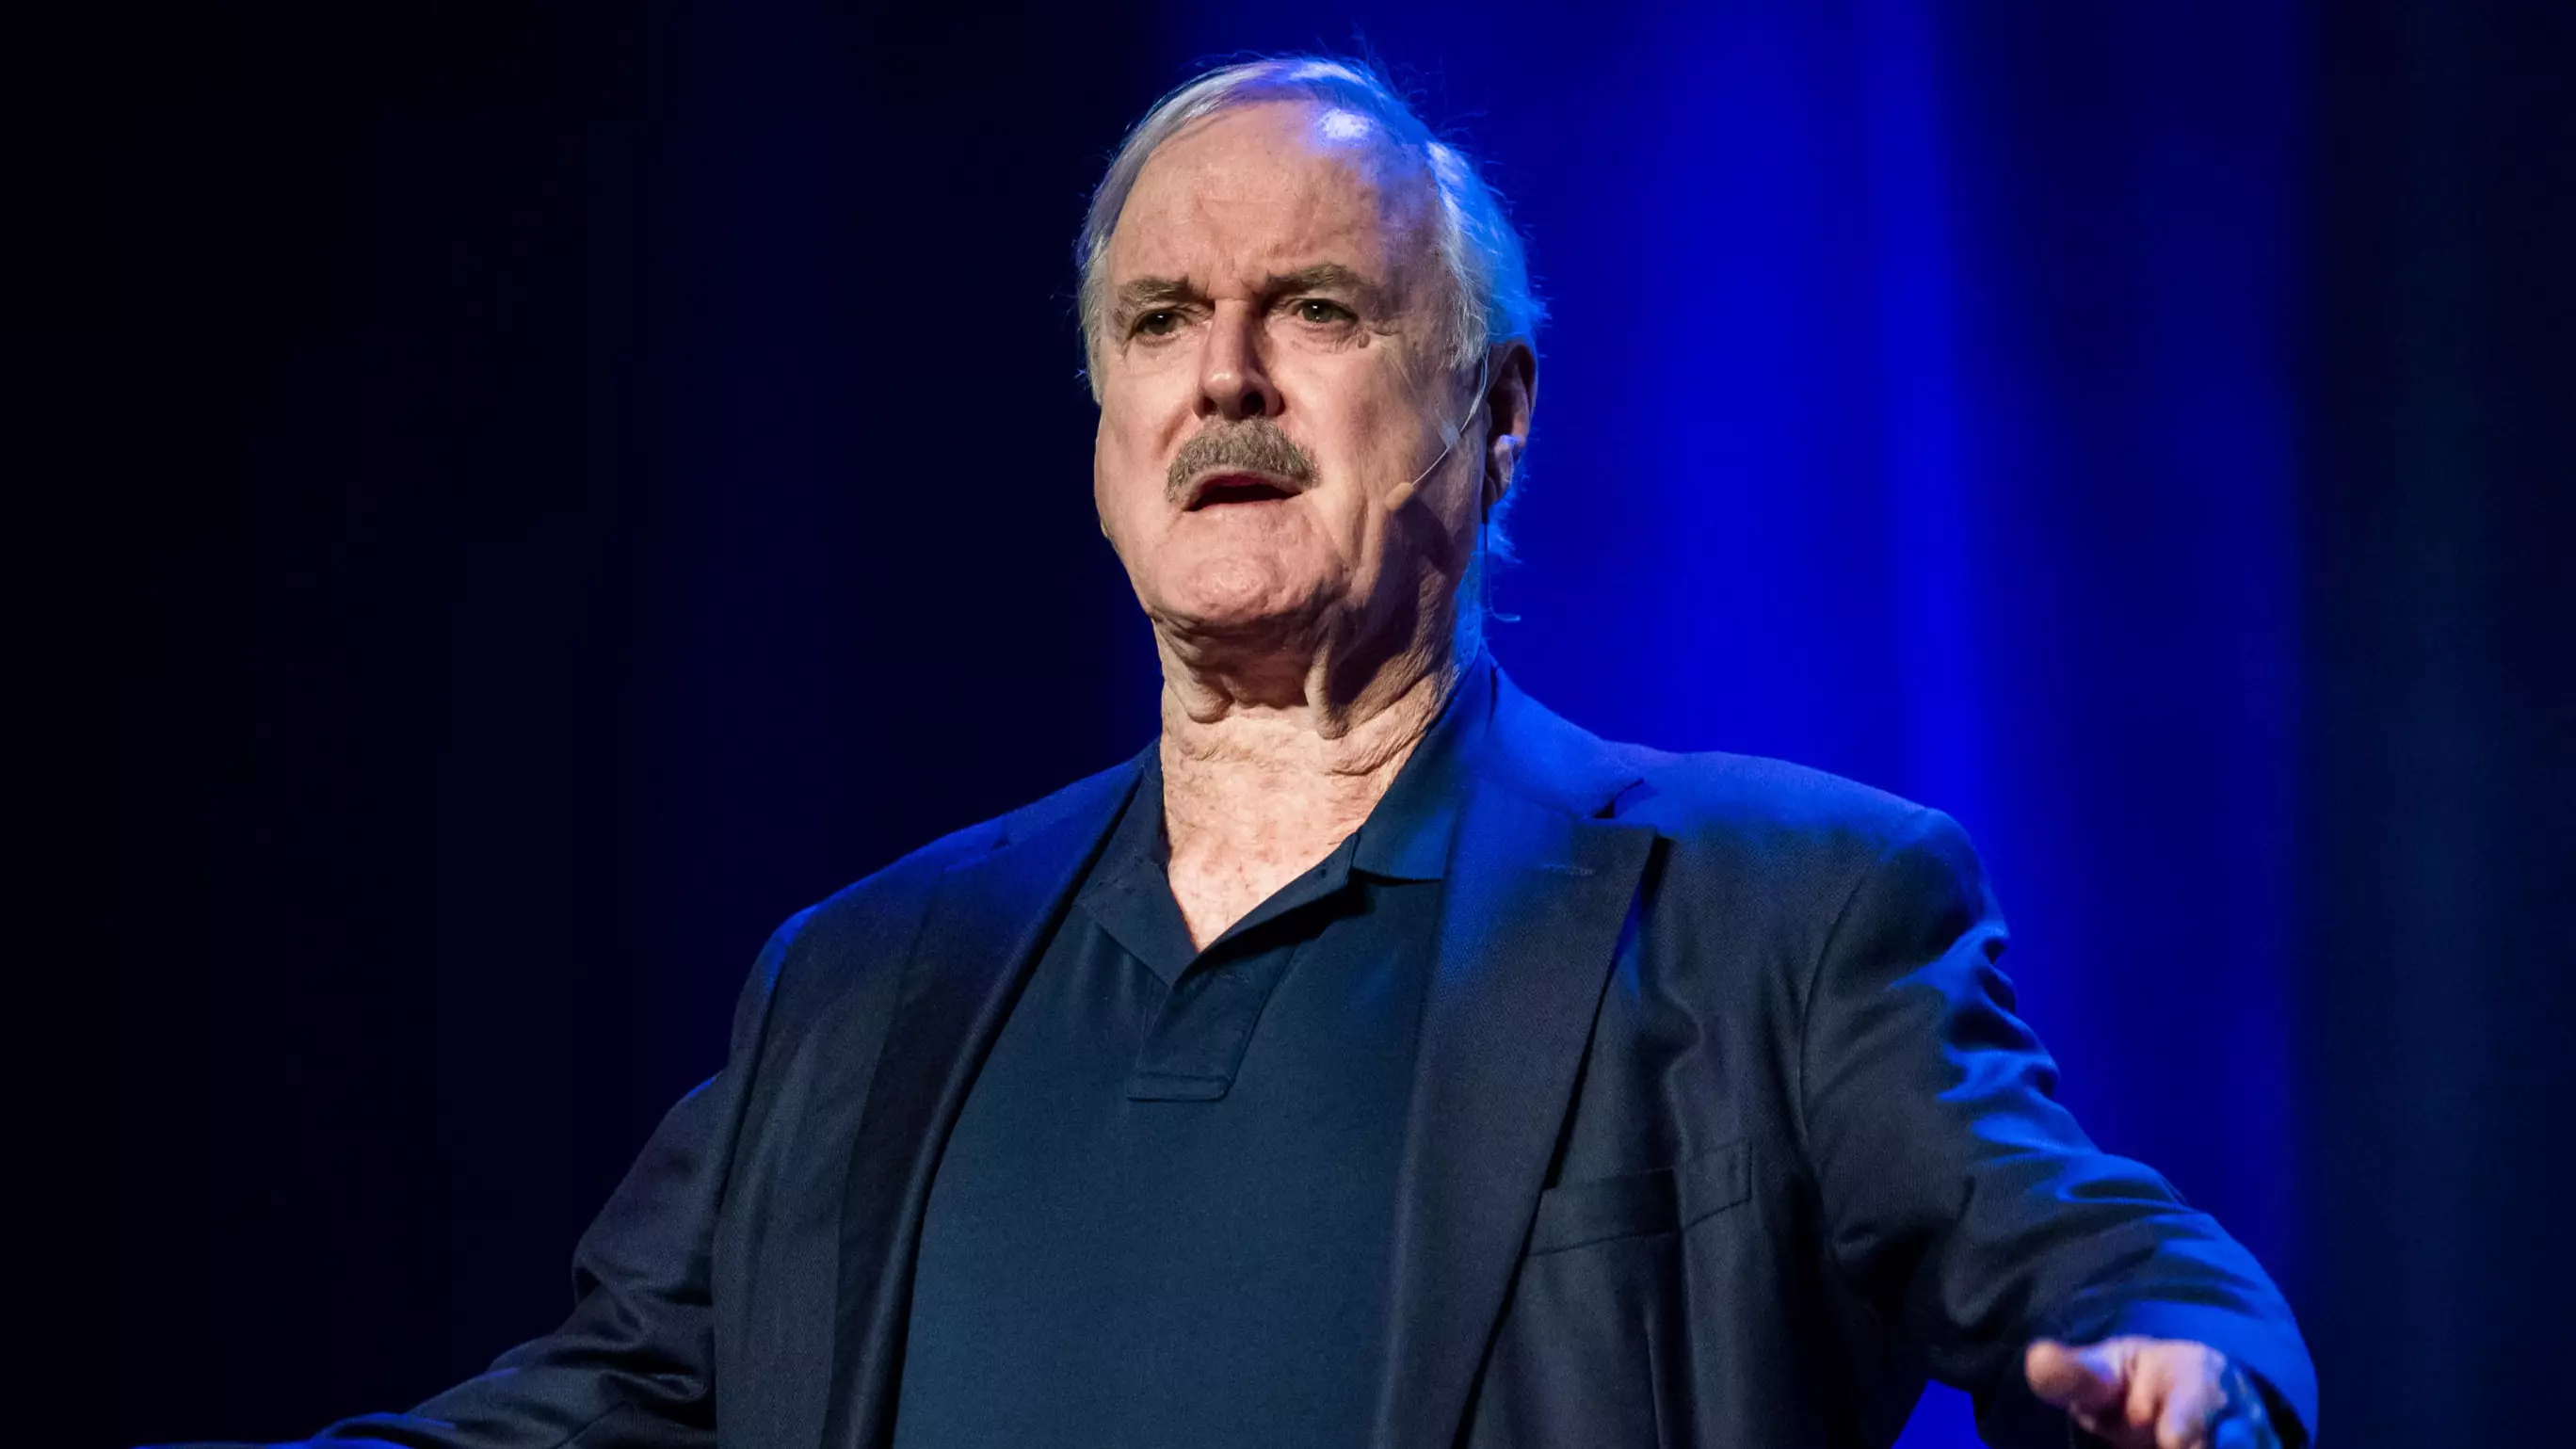 John Cleese Pulls Out Of Event Because Of Its 'Woke Rules'